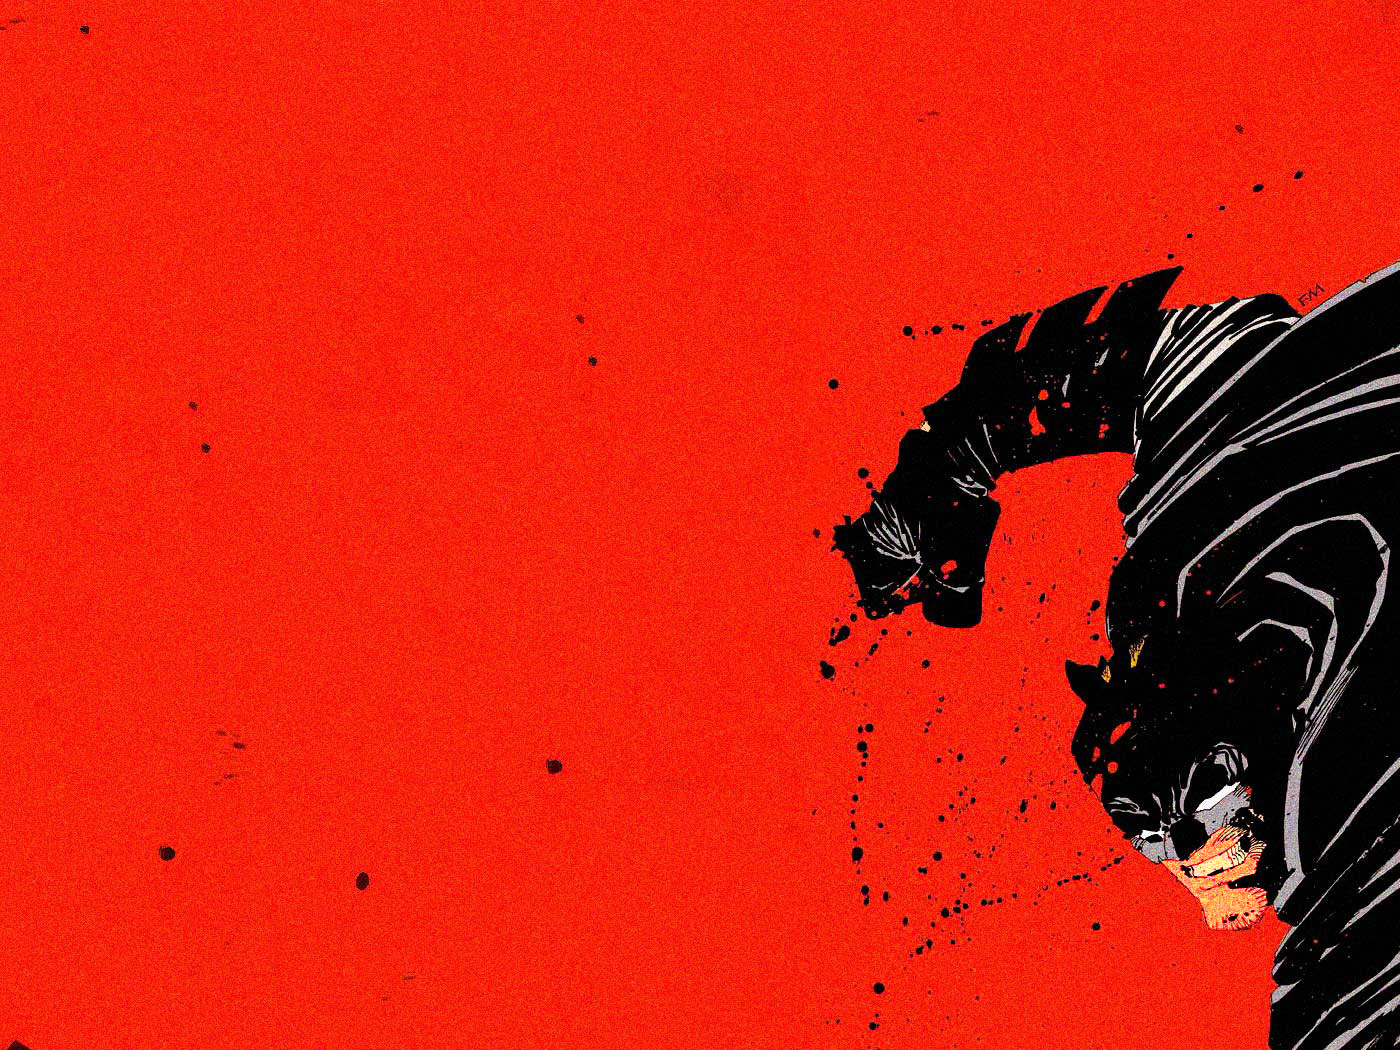 Frank Miller Wallpaper Images Pictures   Becuo